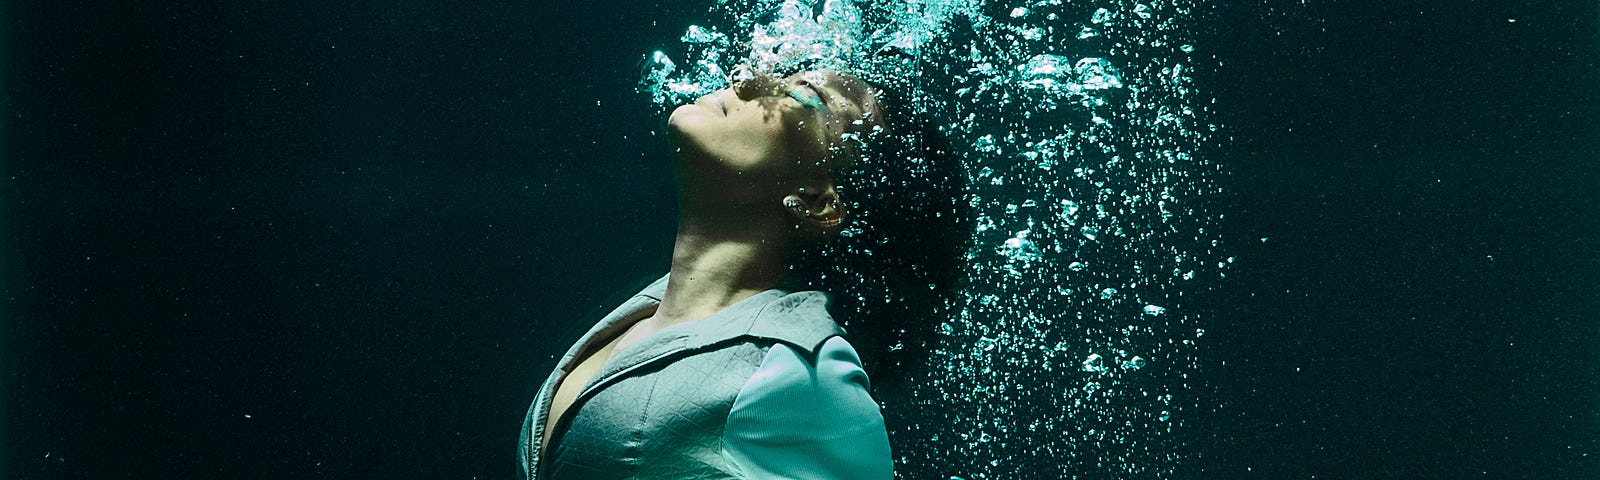 Woman under water, bubbles coming from her mouth. Dark, vertical photo.